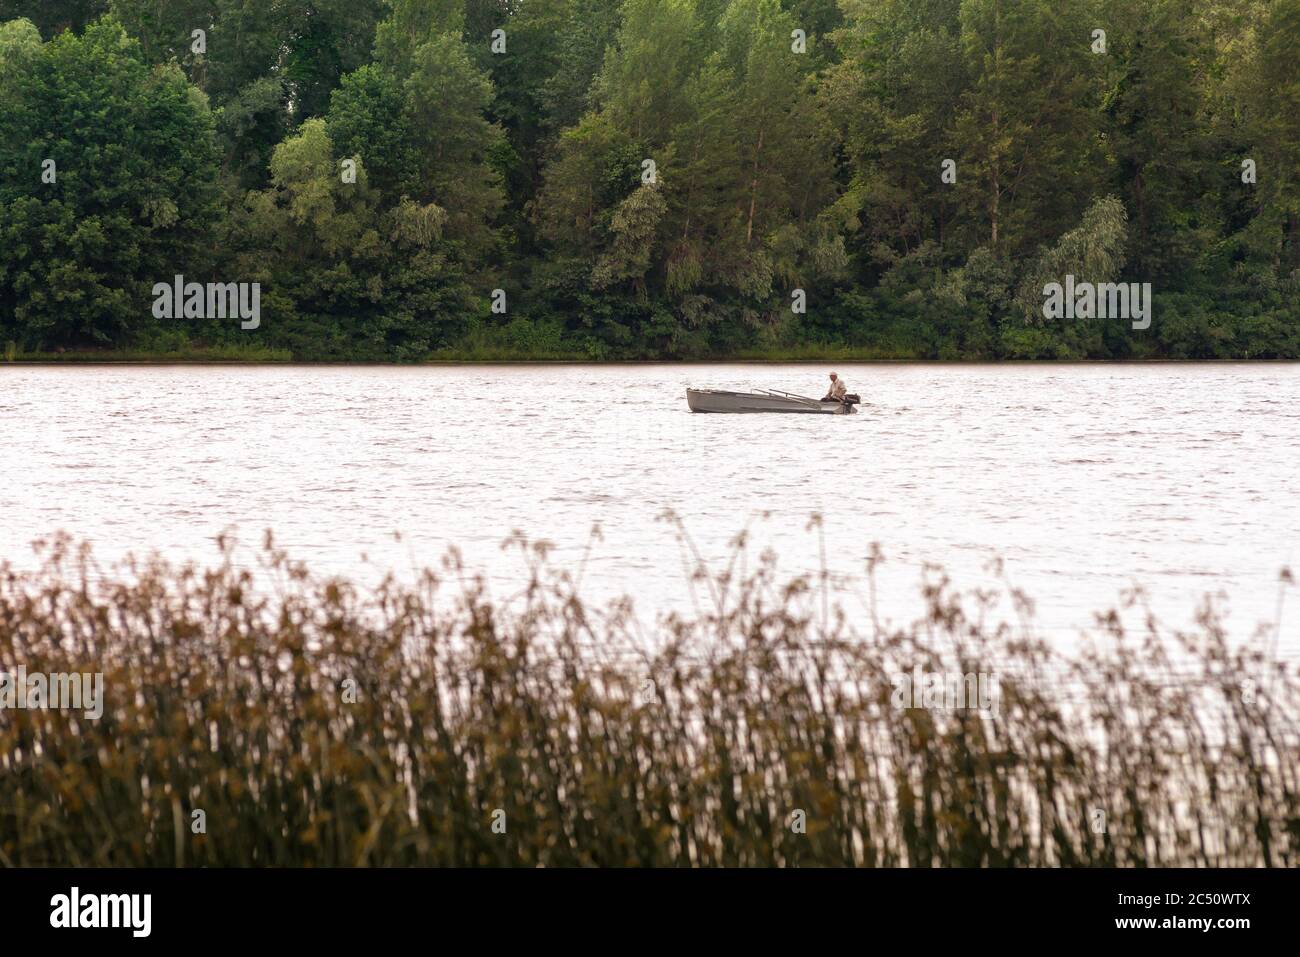 A fisherman on a boat on the Dnieper River in Kiev, Ukraine, between reeds and the forest Stock Photo